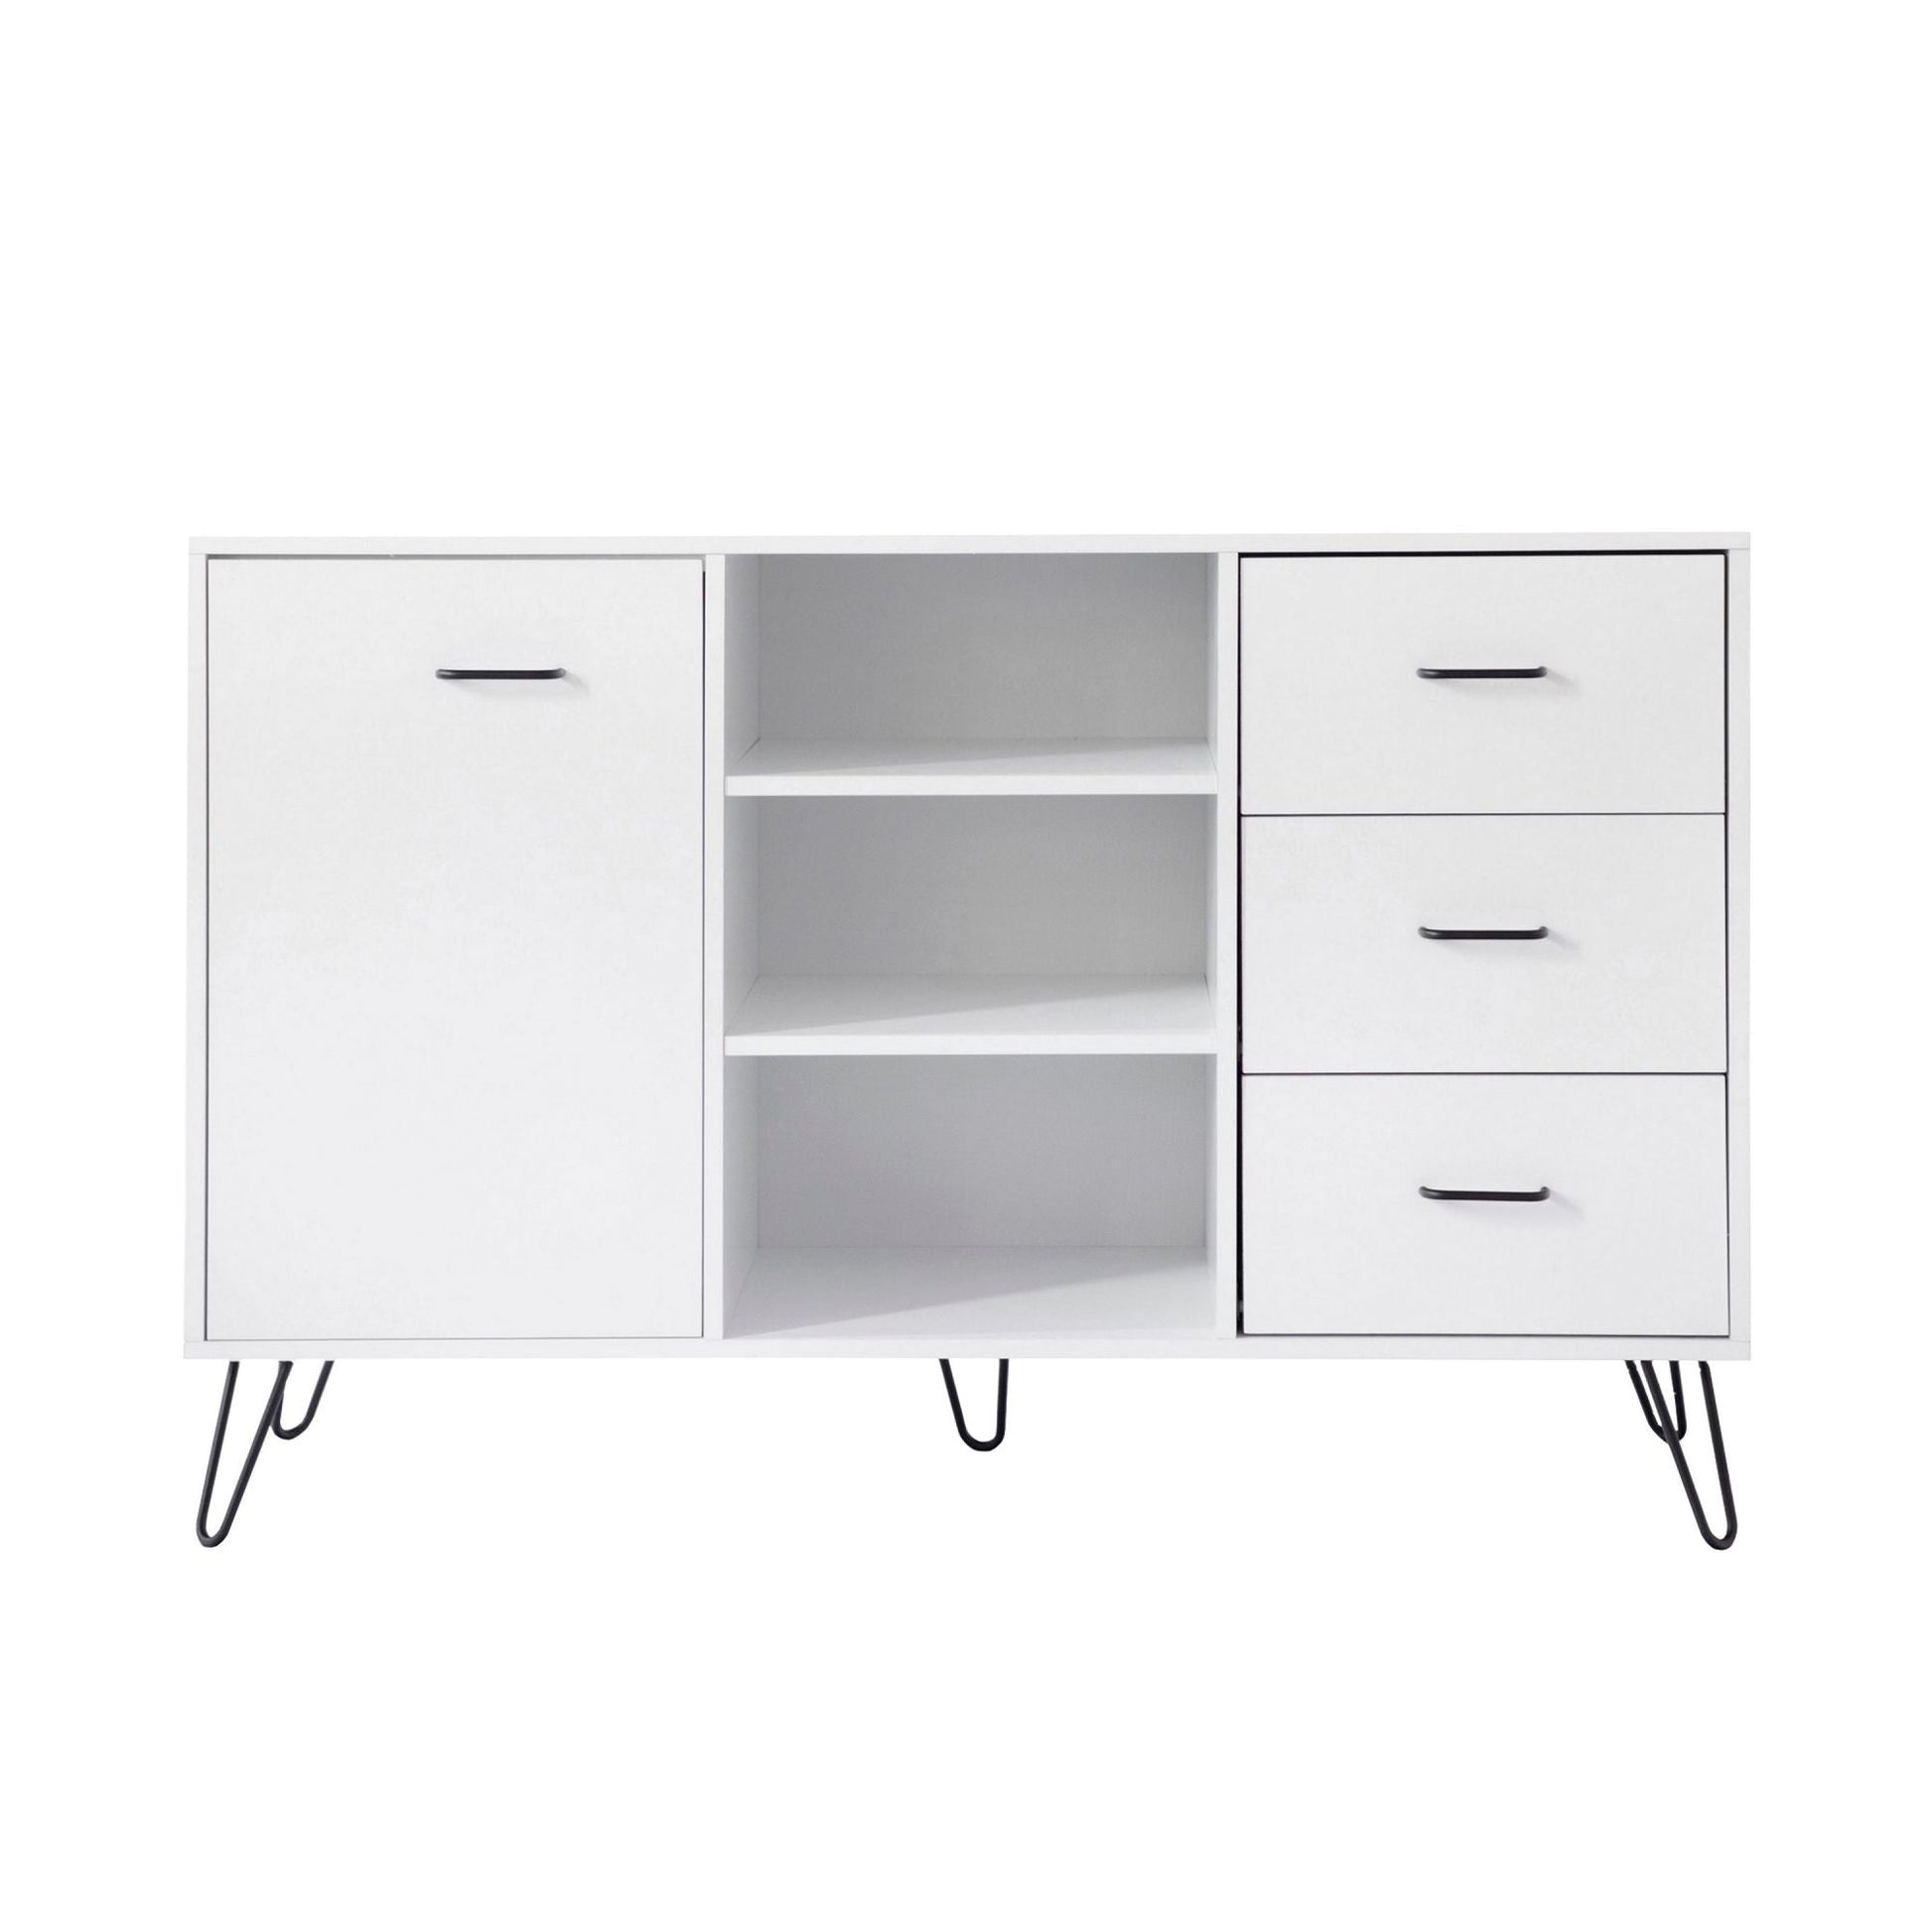 49 Inch Sideboard Buffet Console Cabinet with 3 Drawers, White Home Decor by Design